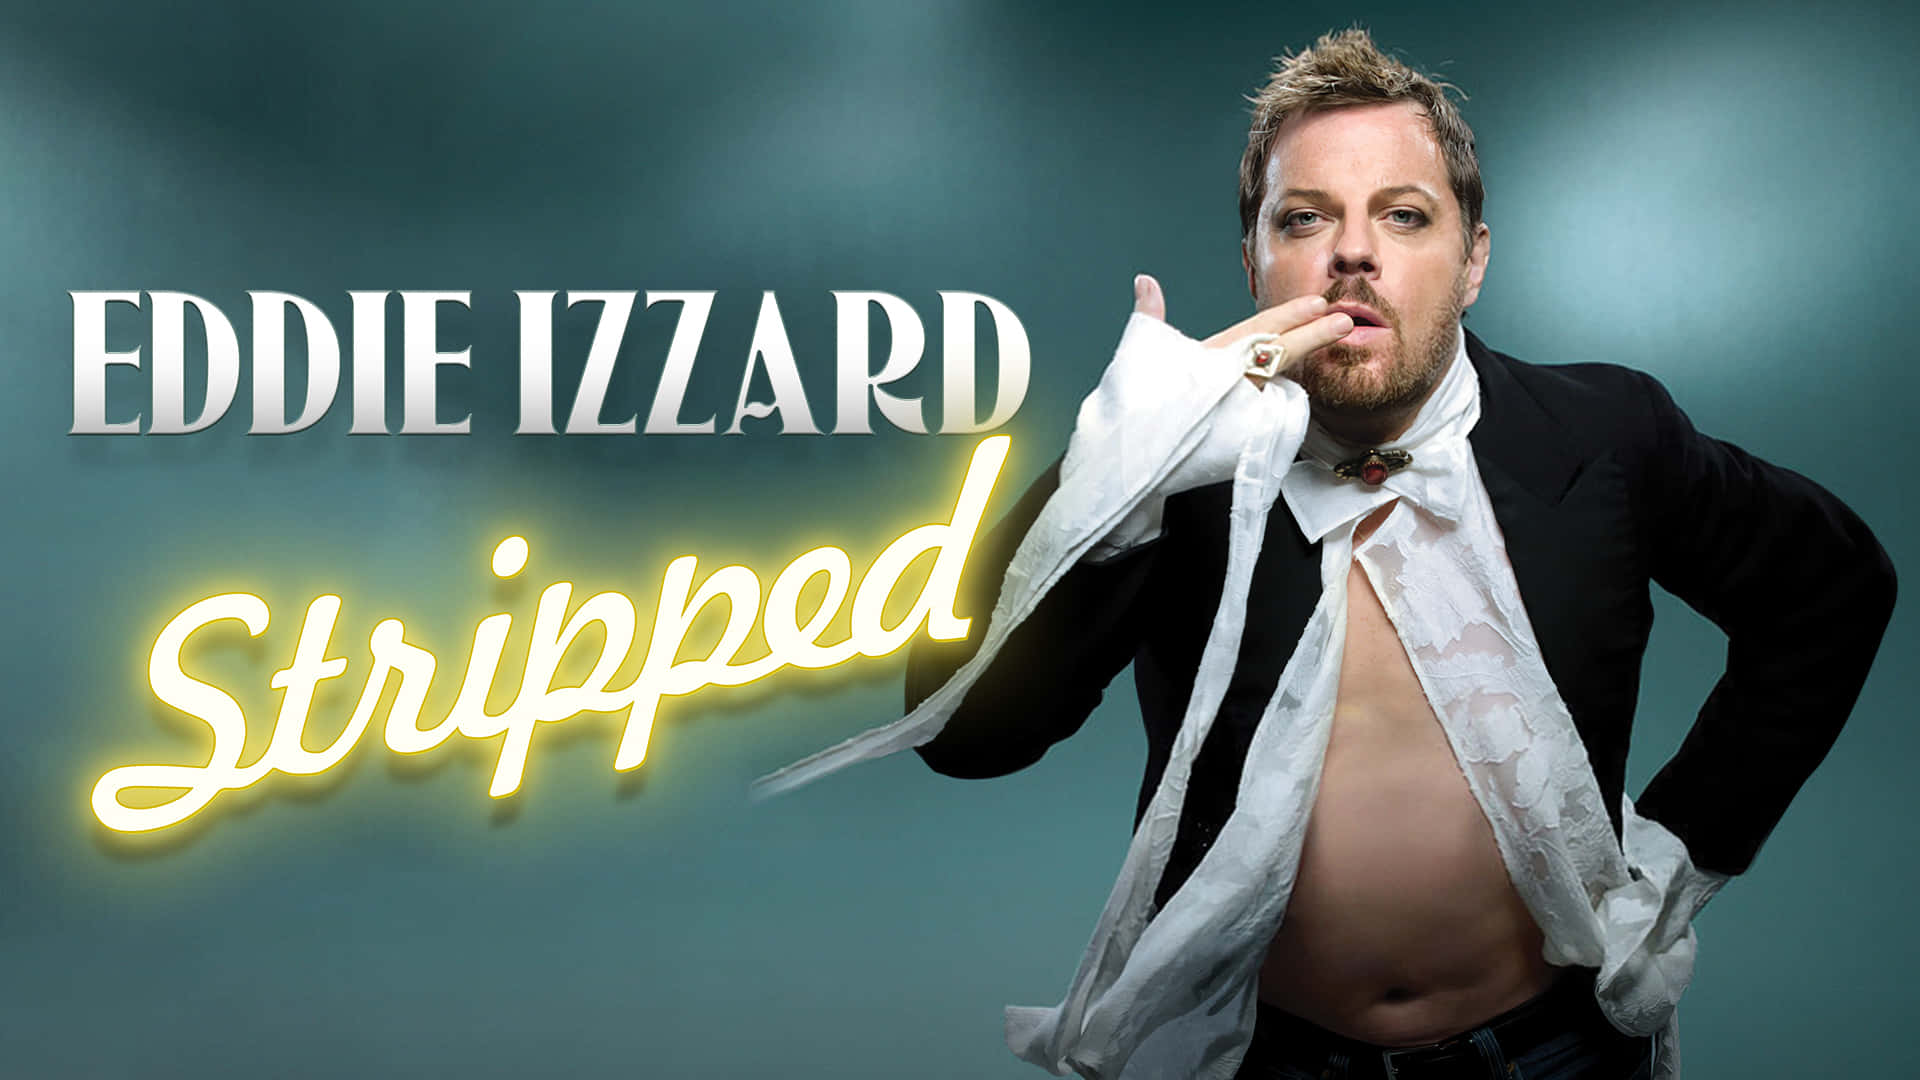 Caption: Eddie Izzard on stage during a live performance Wallpaper